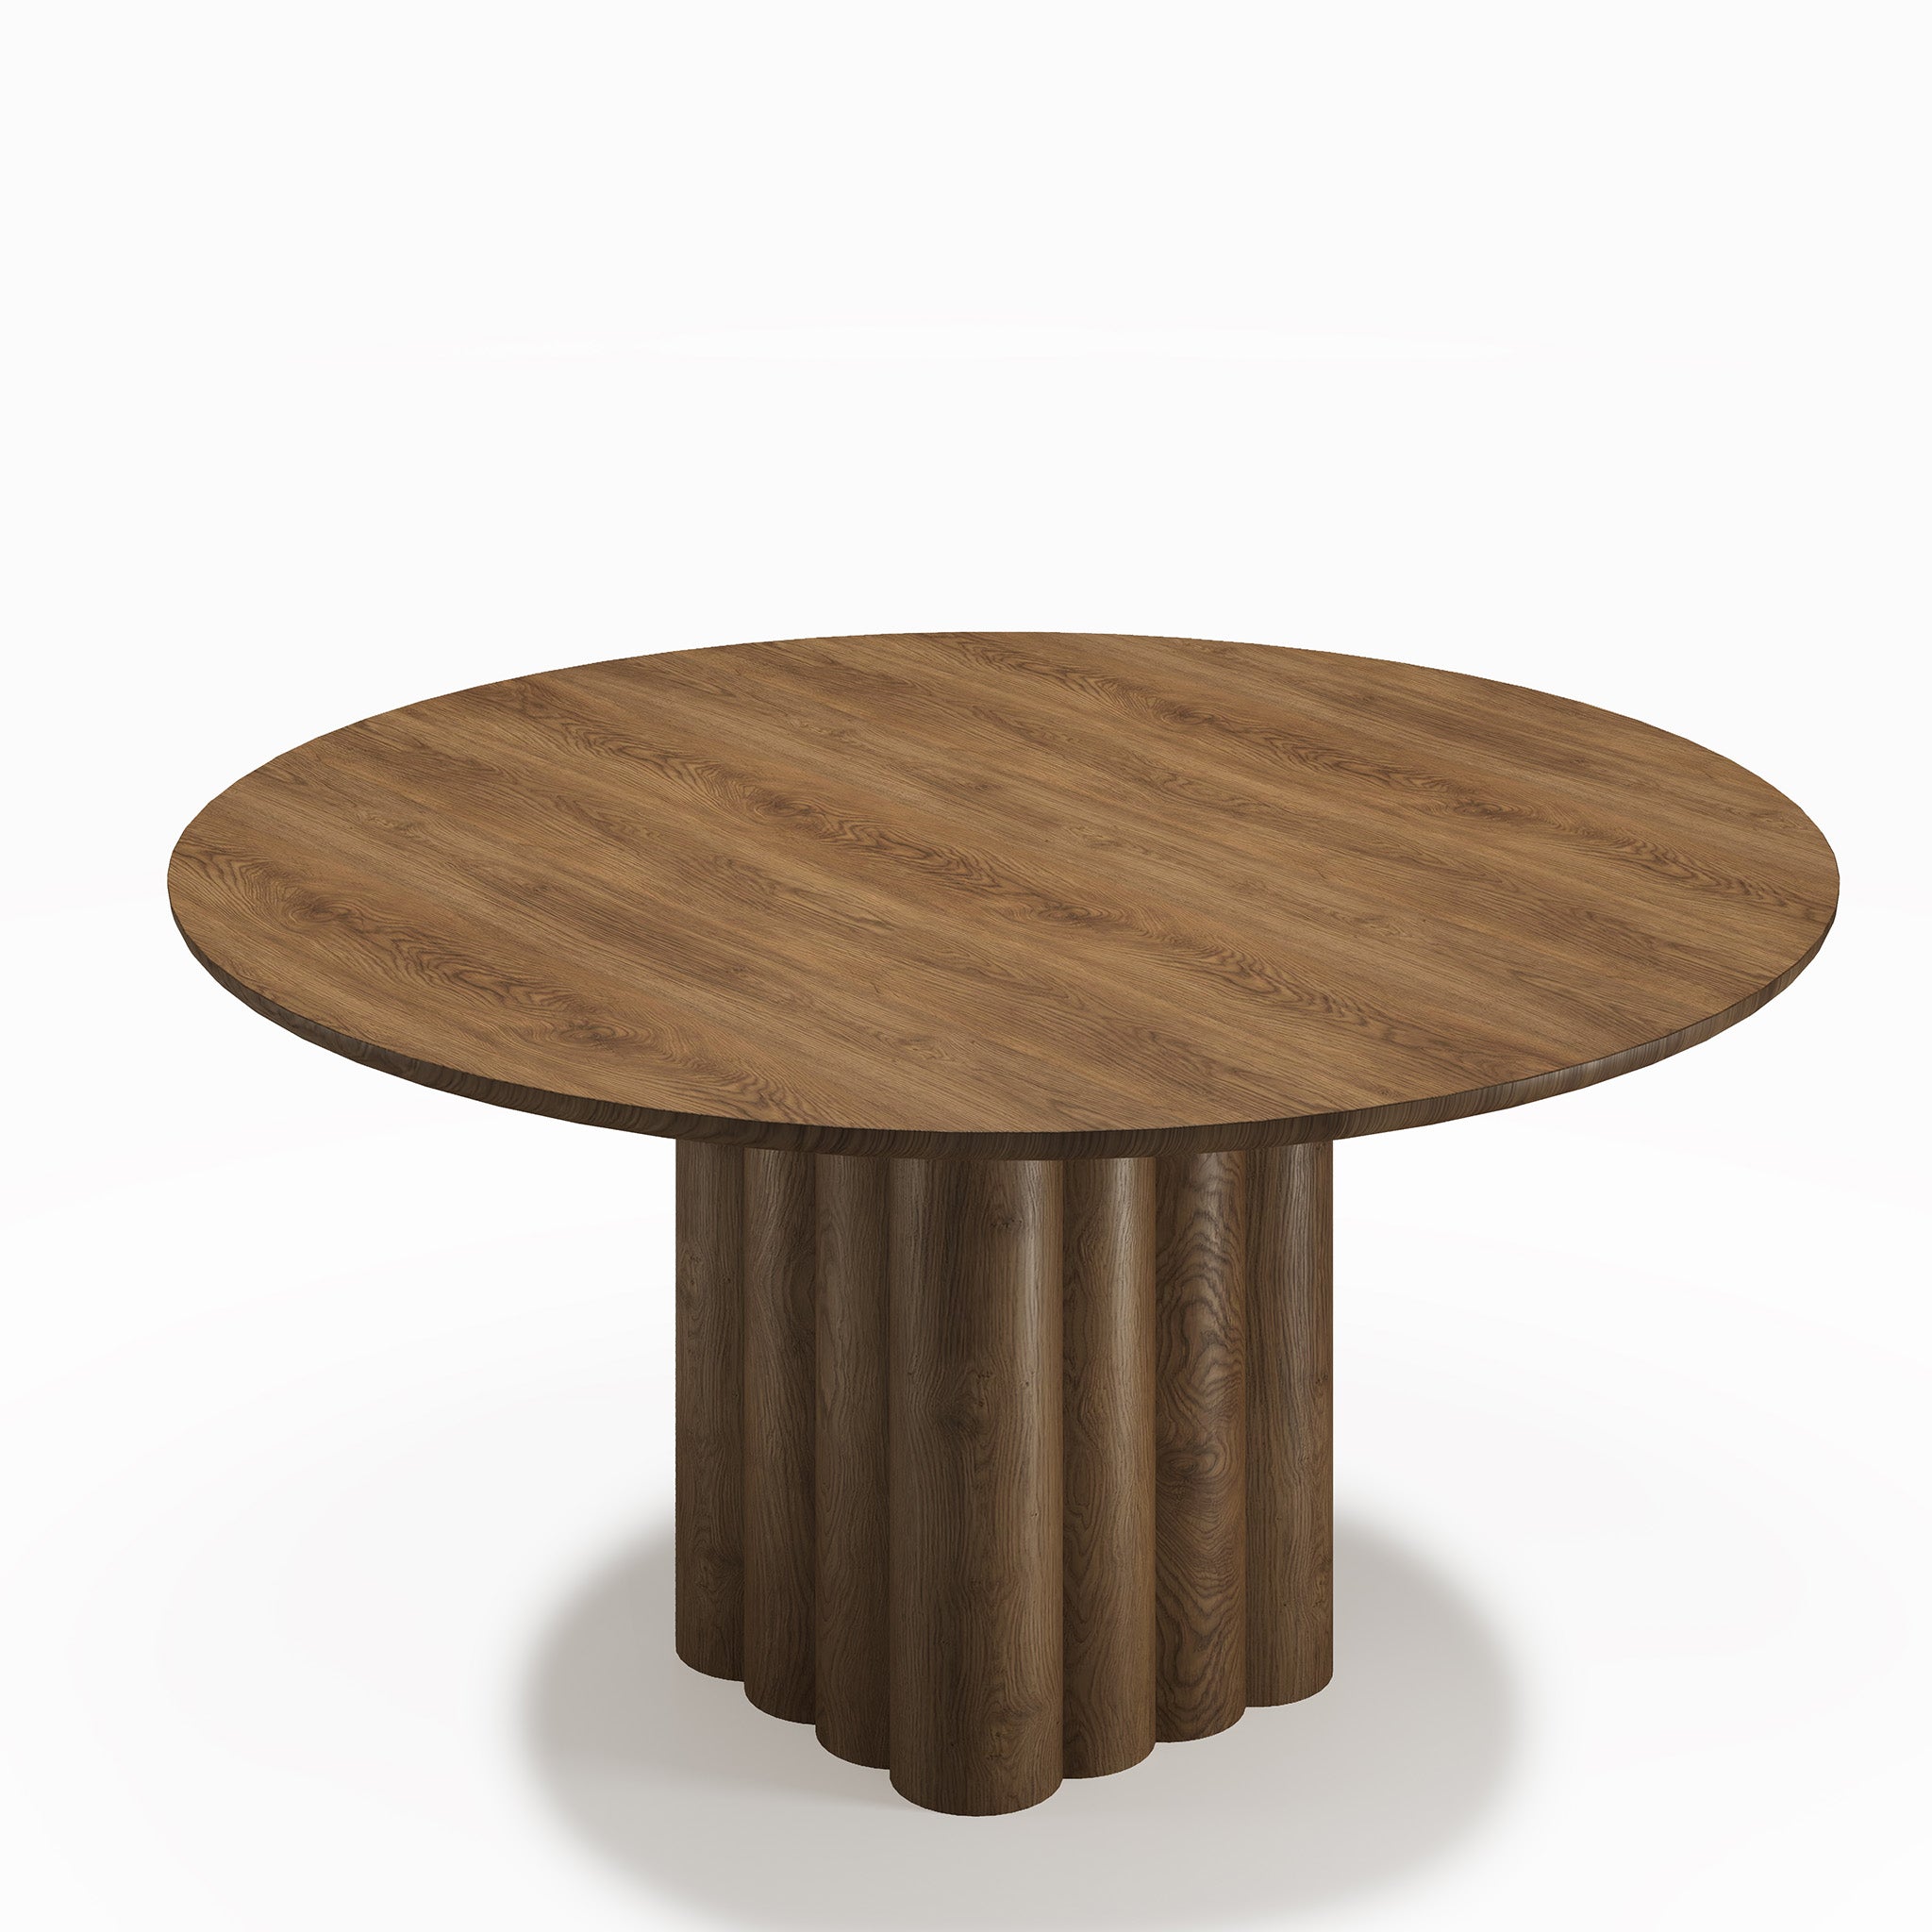 Plush Table Round by Jacob Plejdrup for DK3